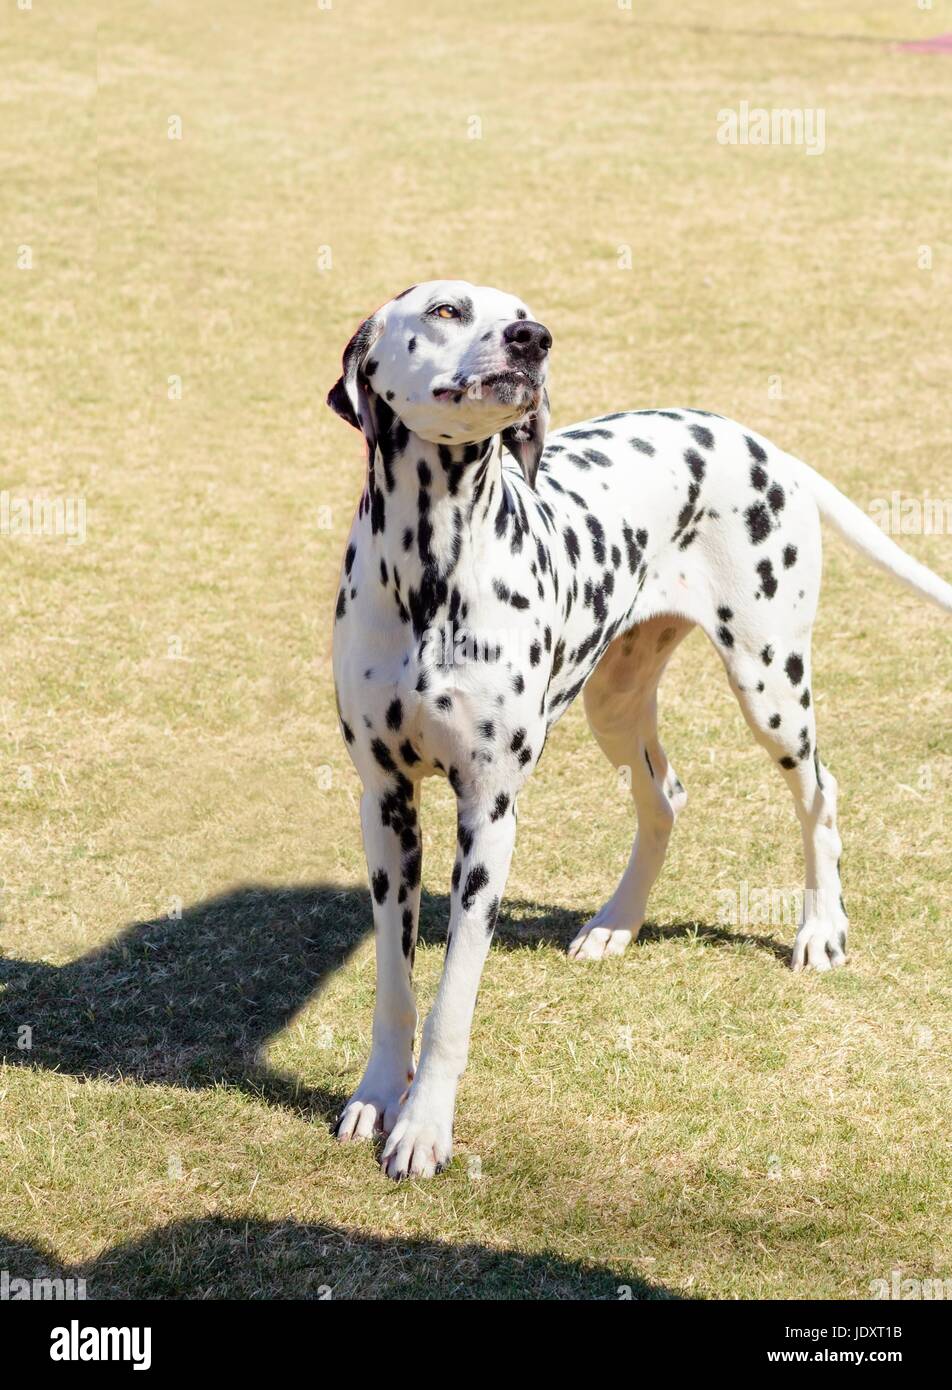 A young beautiful Dalmatian dog standing on the lawn distinctive for its white and black spots on its coat and for being alert, active and an intelligent breed. Stock Photo